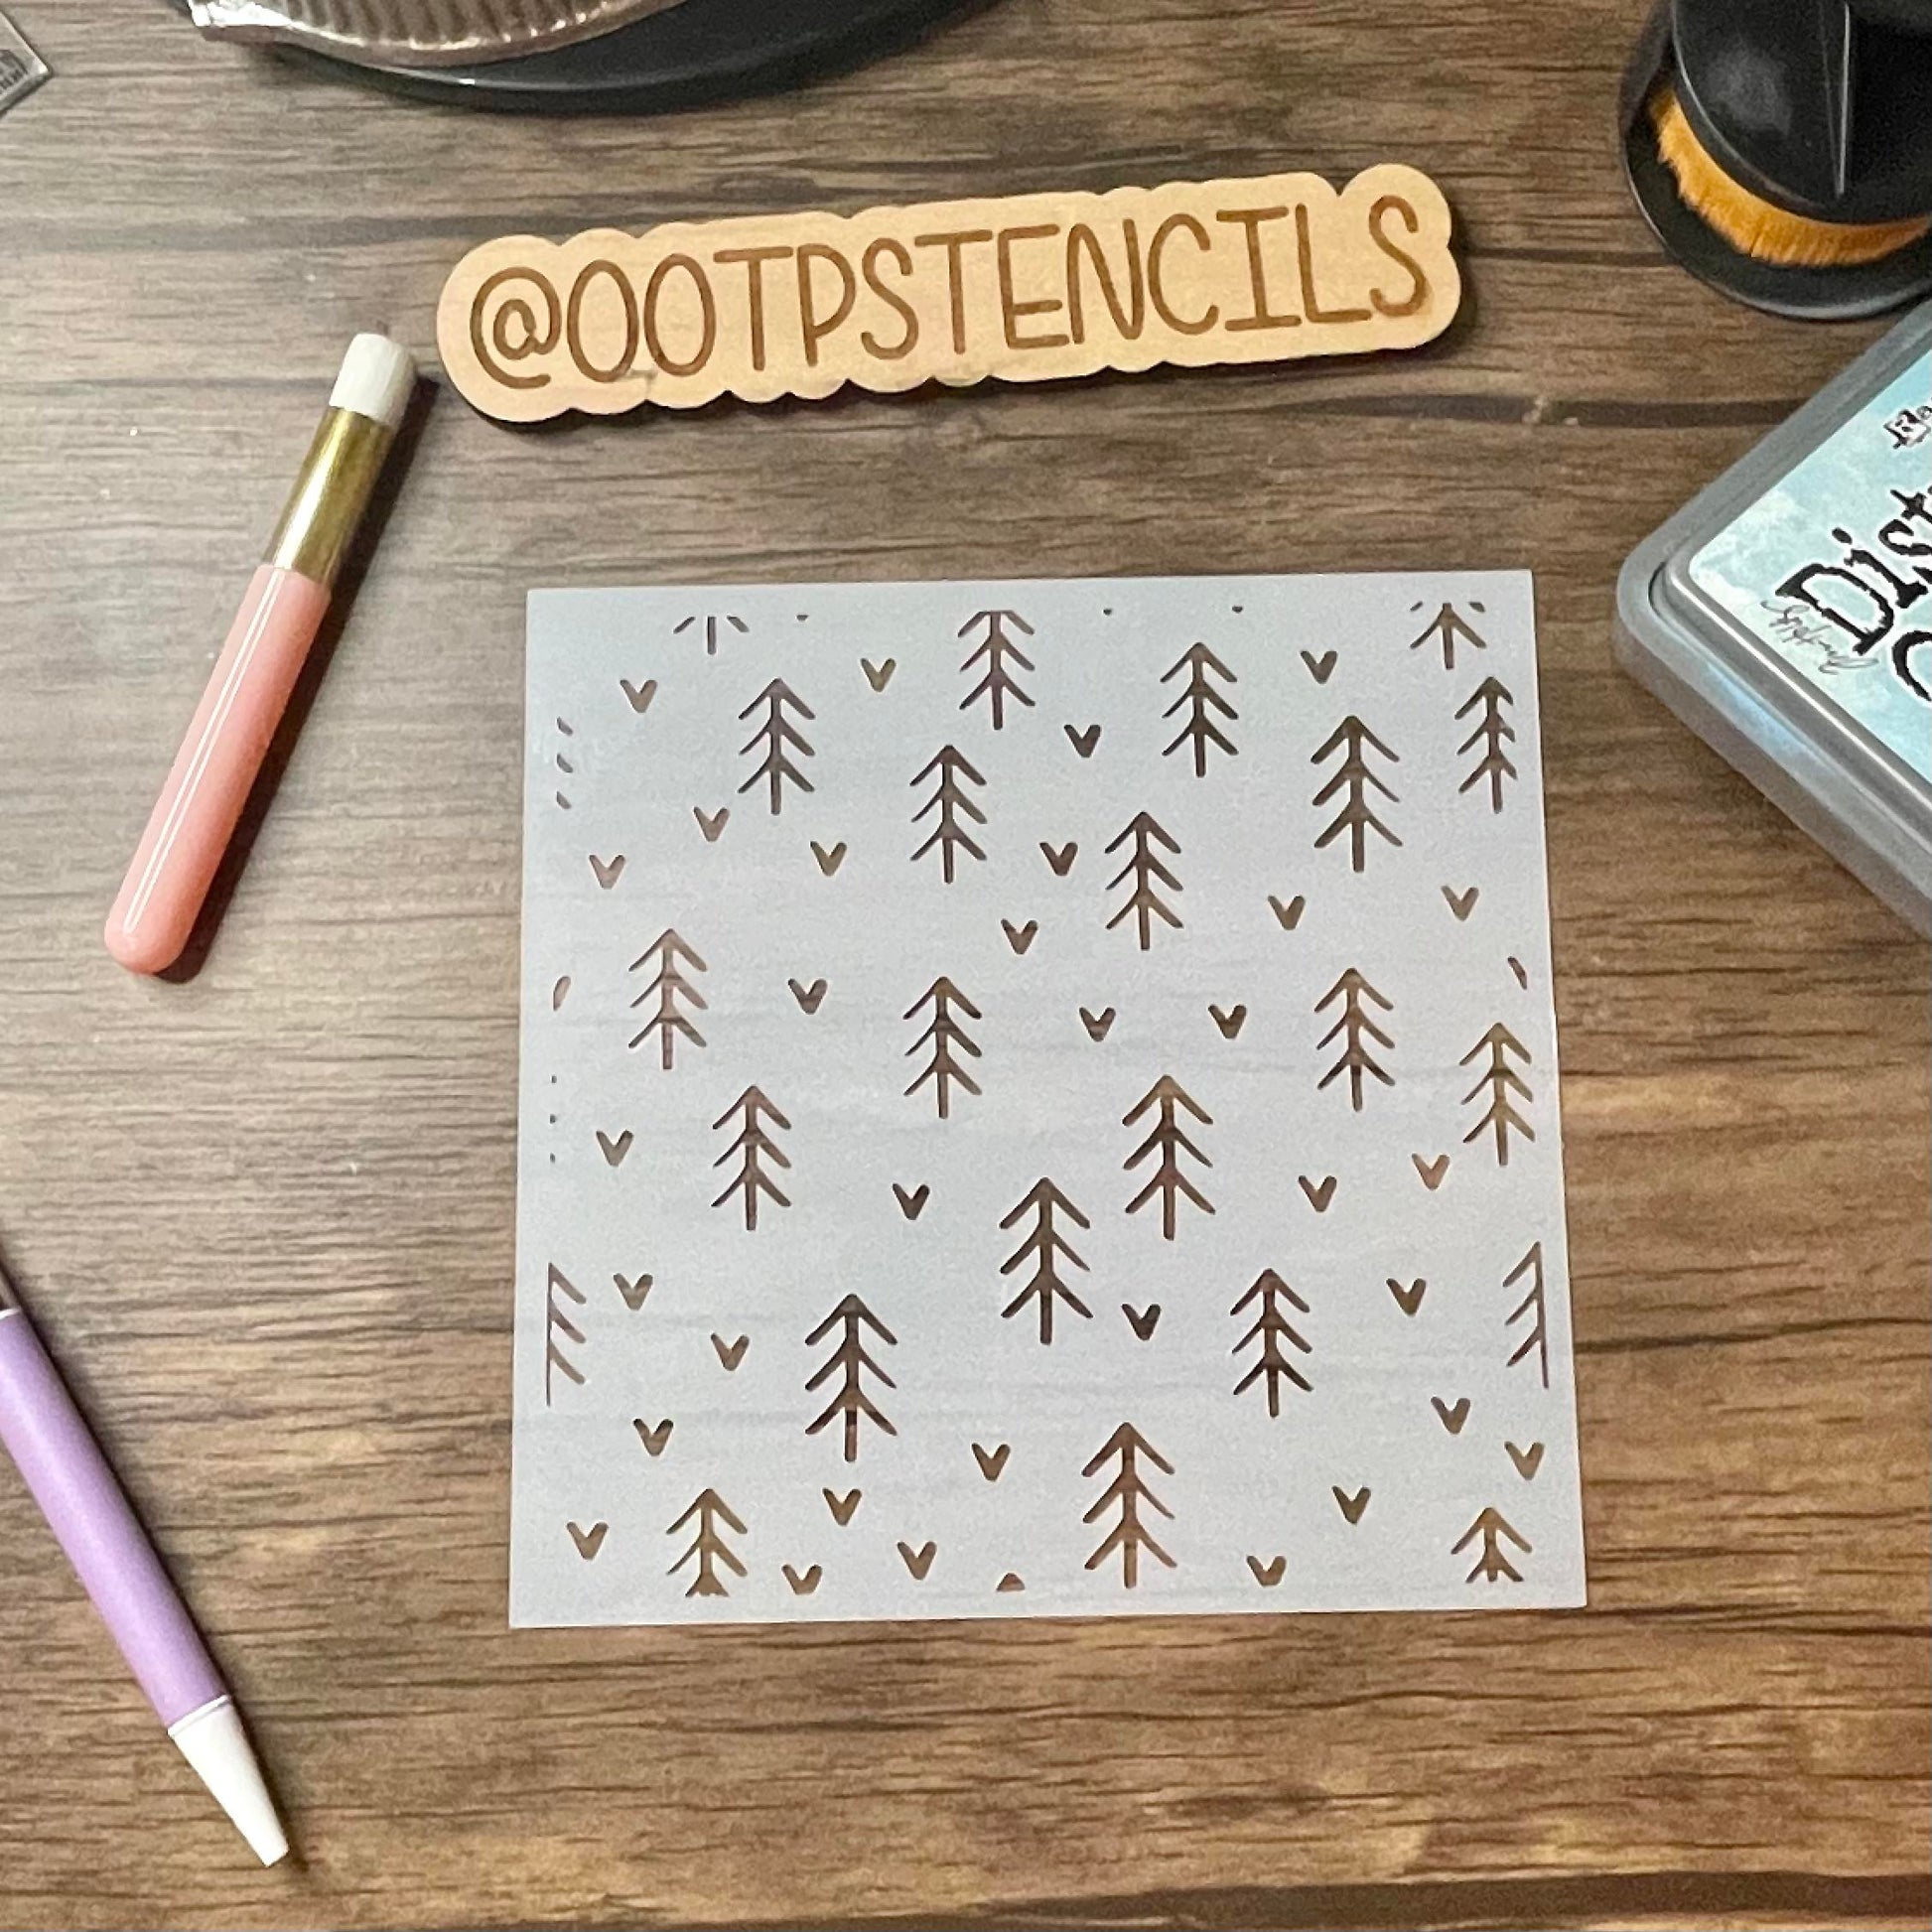 HOW TO use STENCILS in a BULLET JOURNAL 